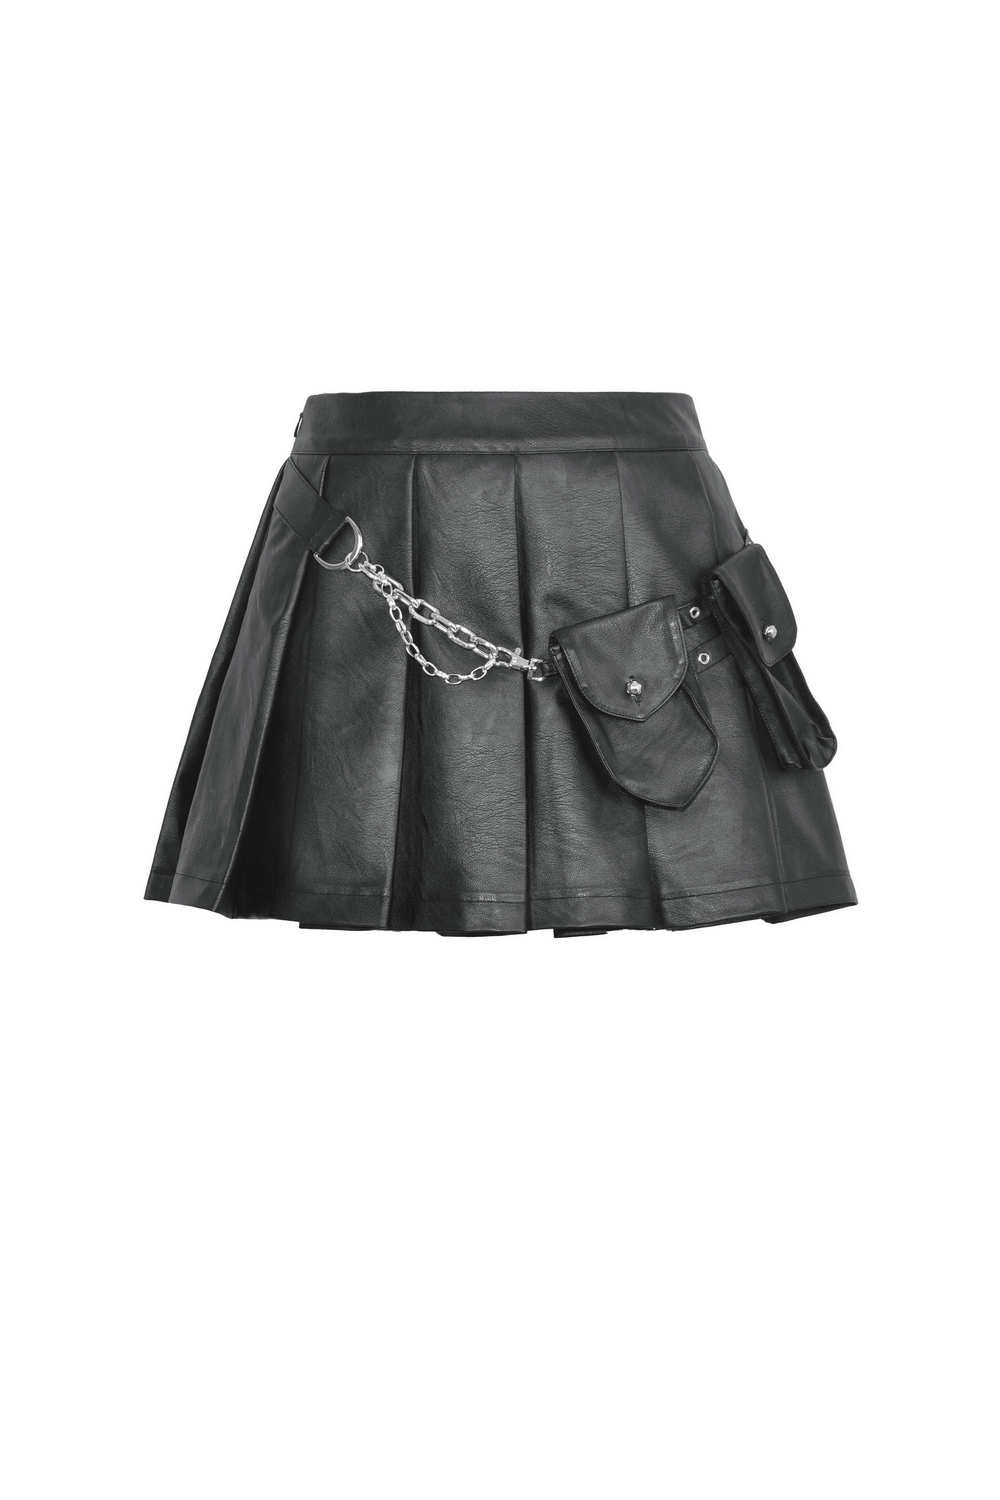 Women's Gothic Punk Mini Skirt with Chain and Side Pockets